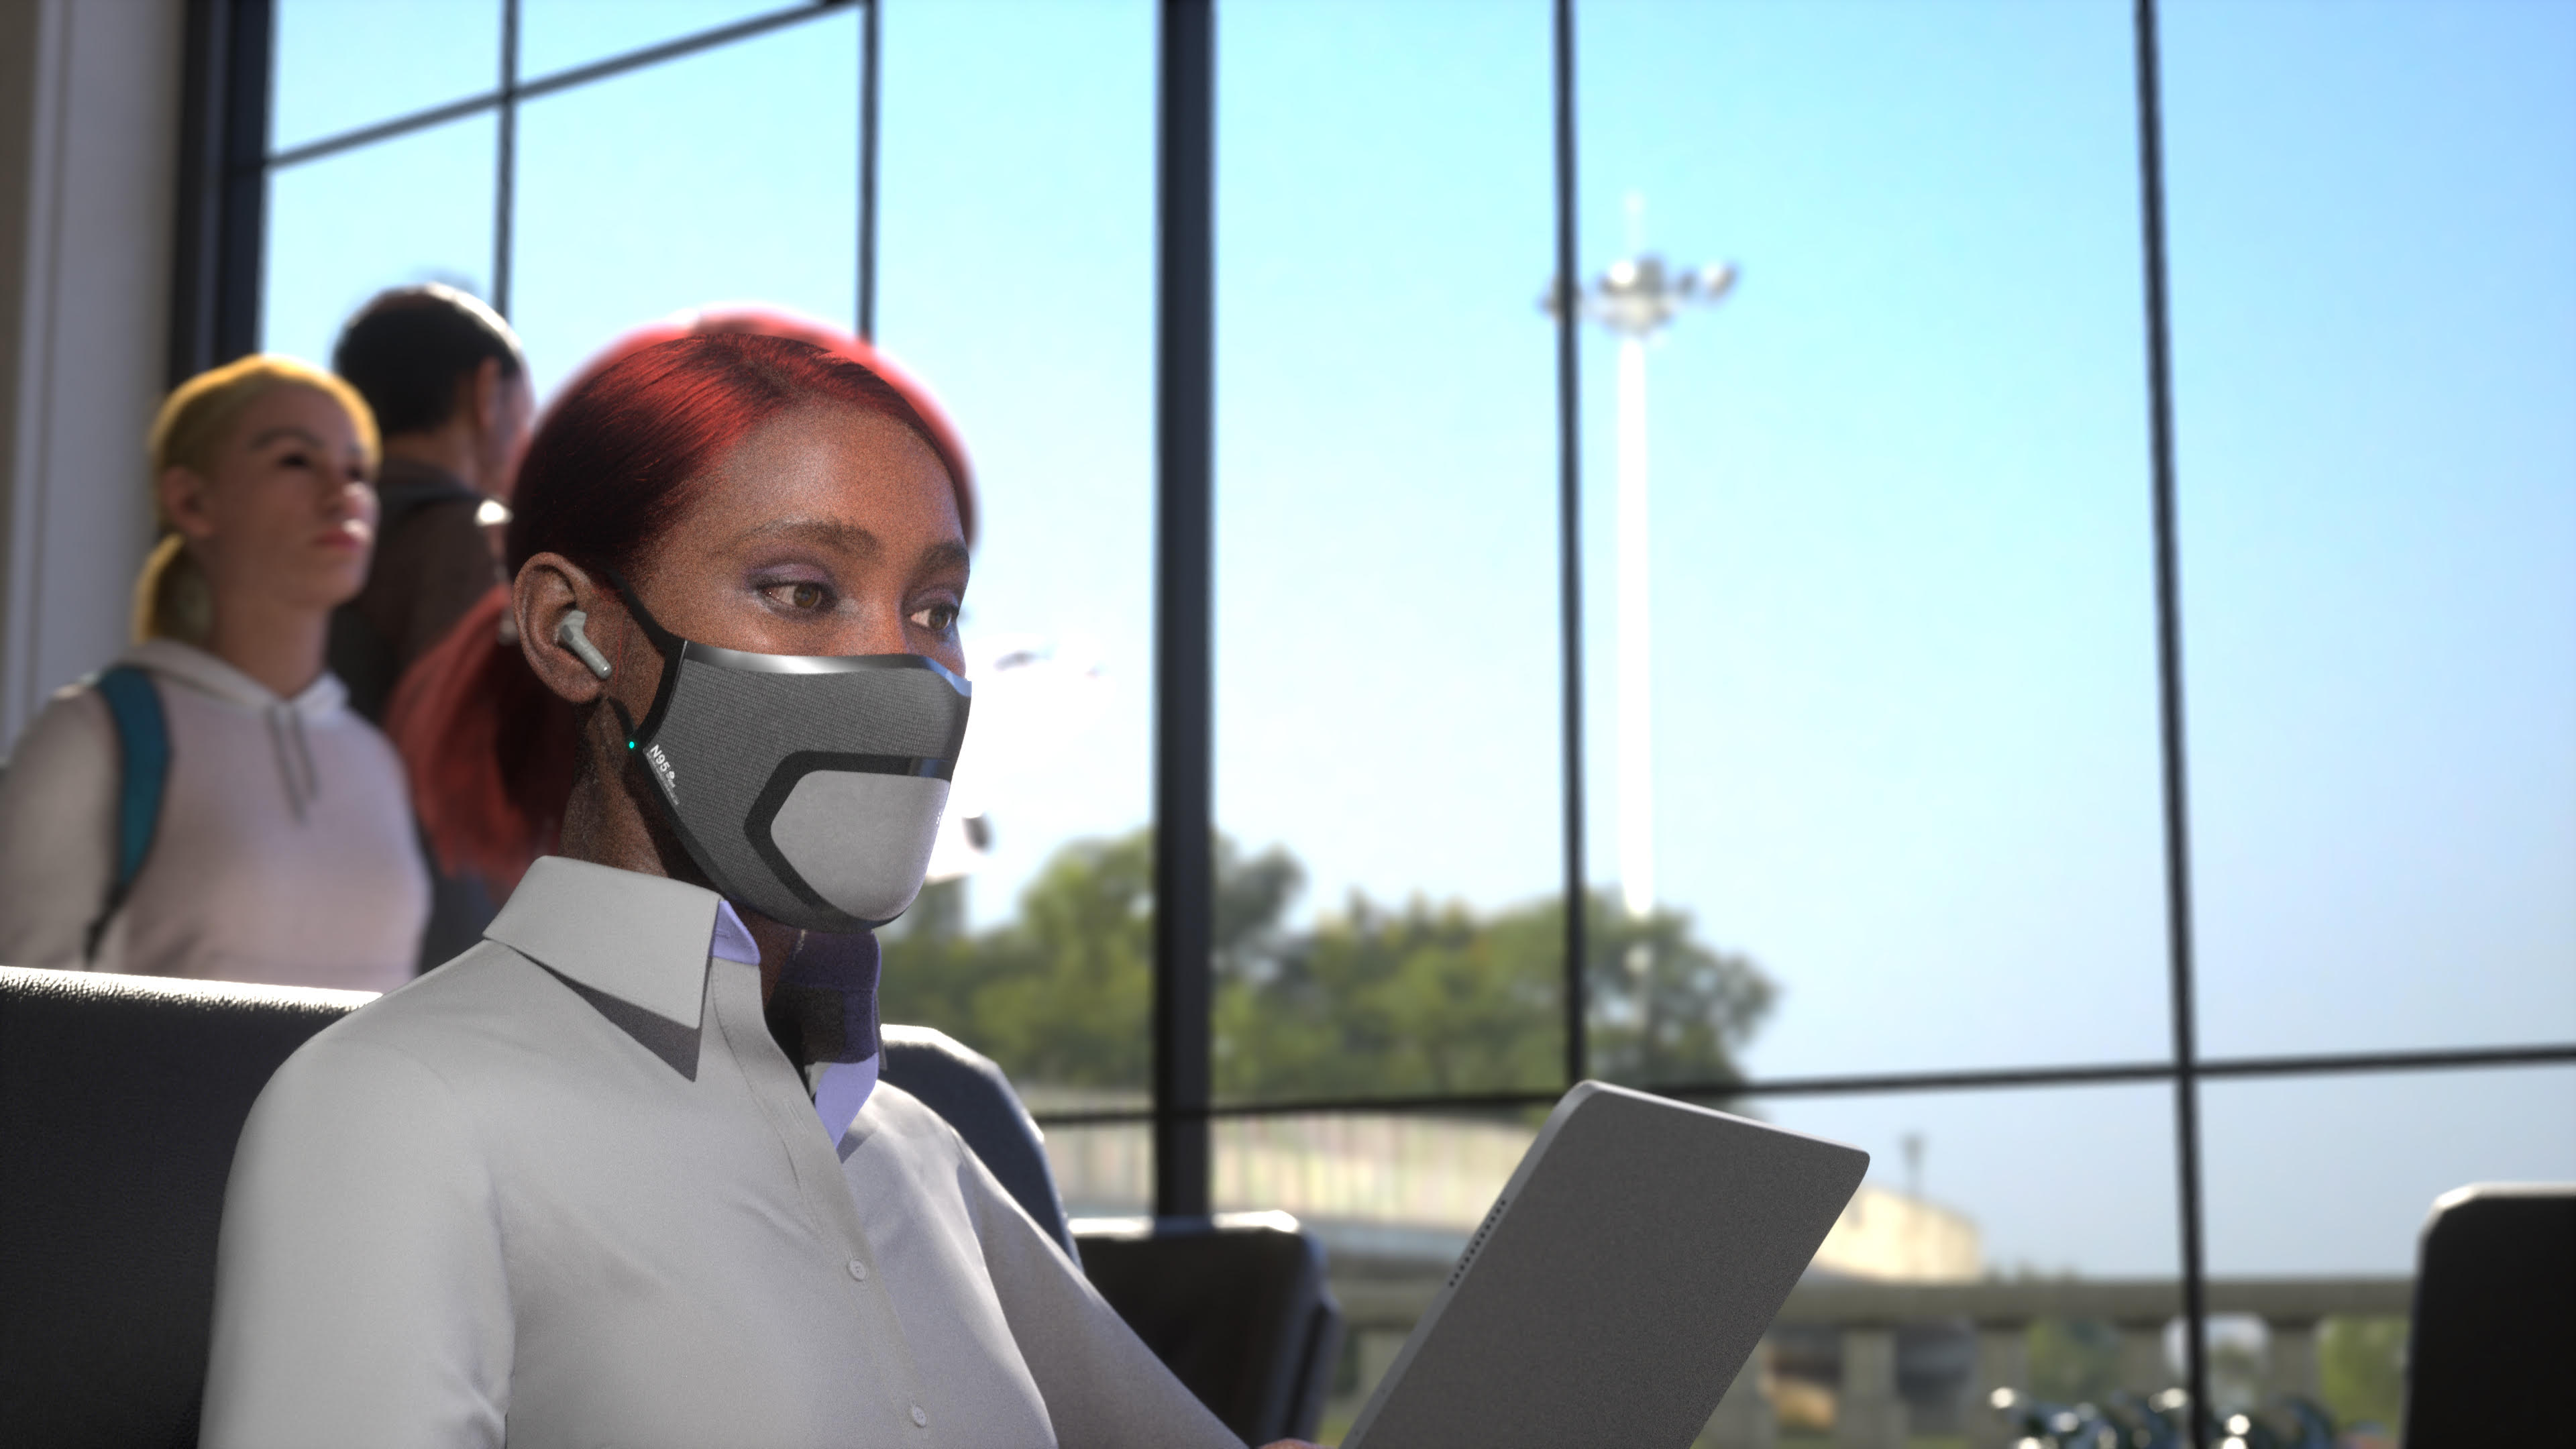 Skyted Will Introduce Voice & Sound Absorbing Mask Providing Privacy for  Confidential Calls, Gaming and More at CES 2023